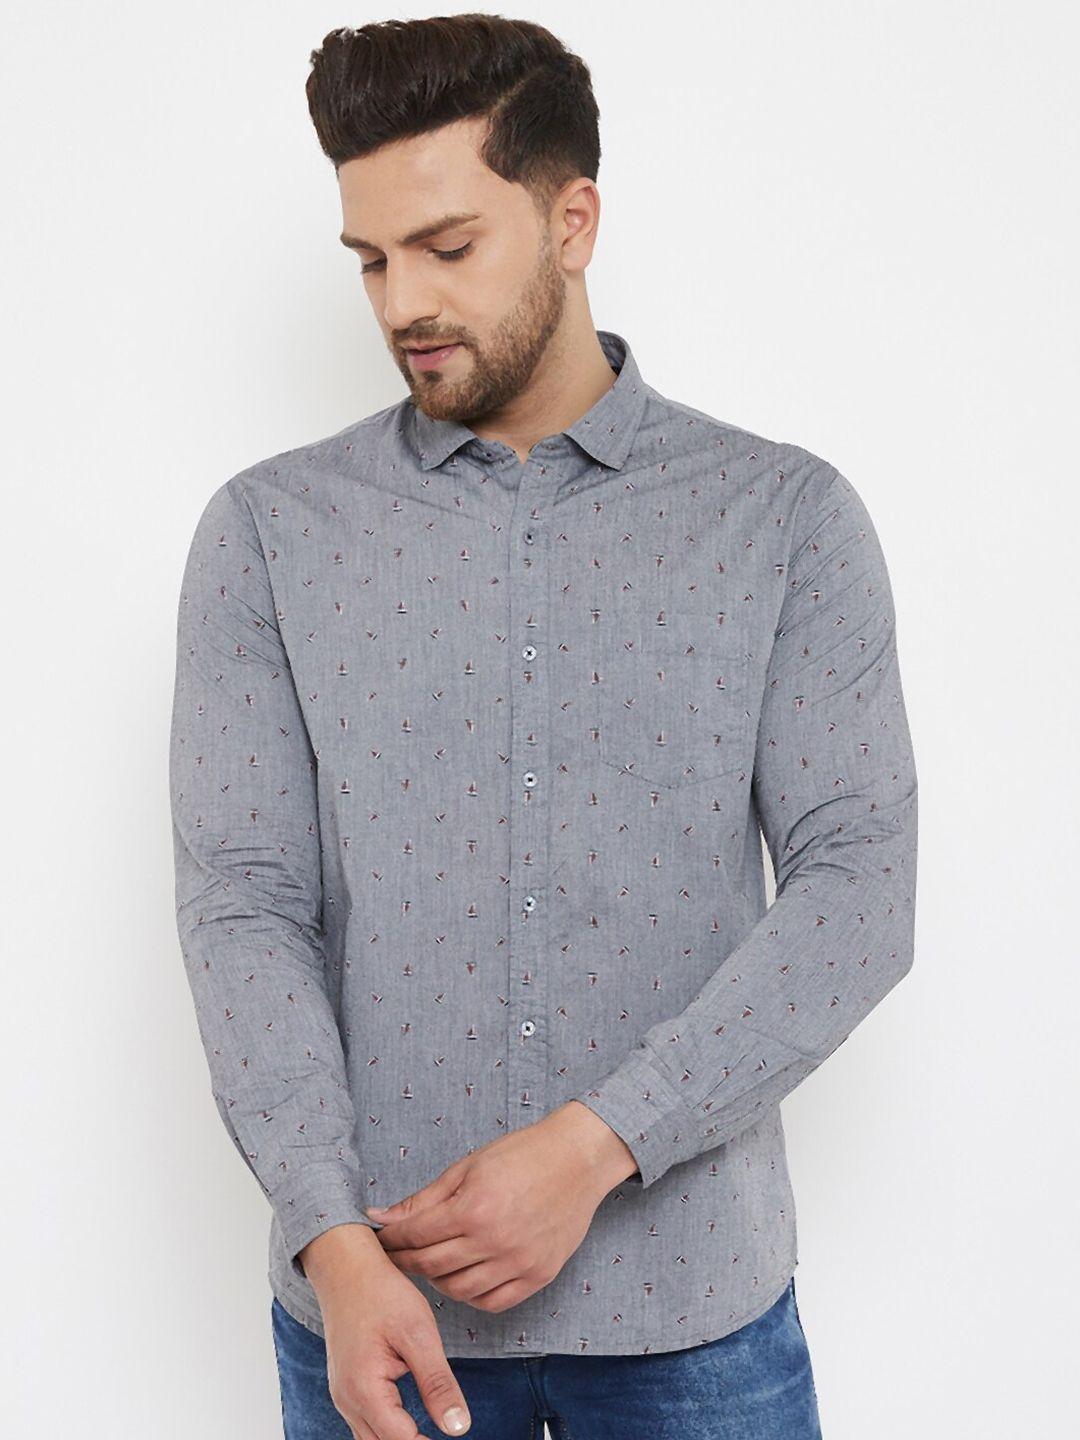 canary-london-micro-ditsy-printed-cotton-slim-fit-casual-shirt